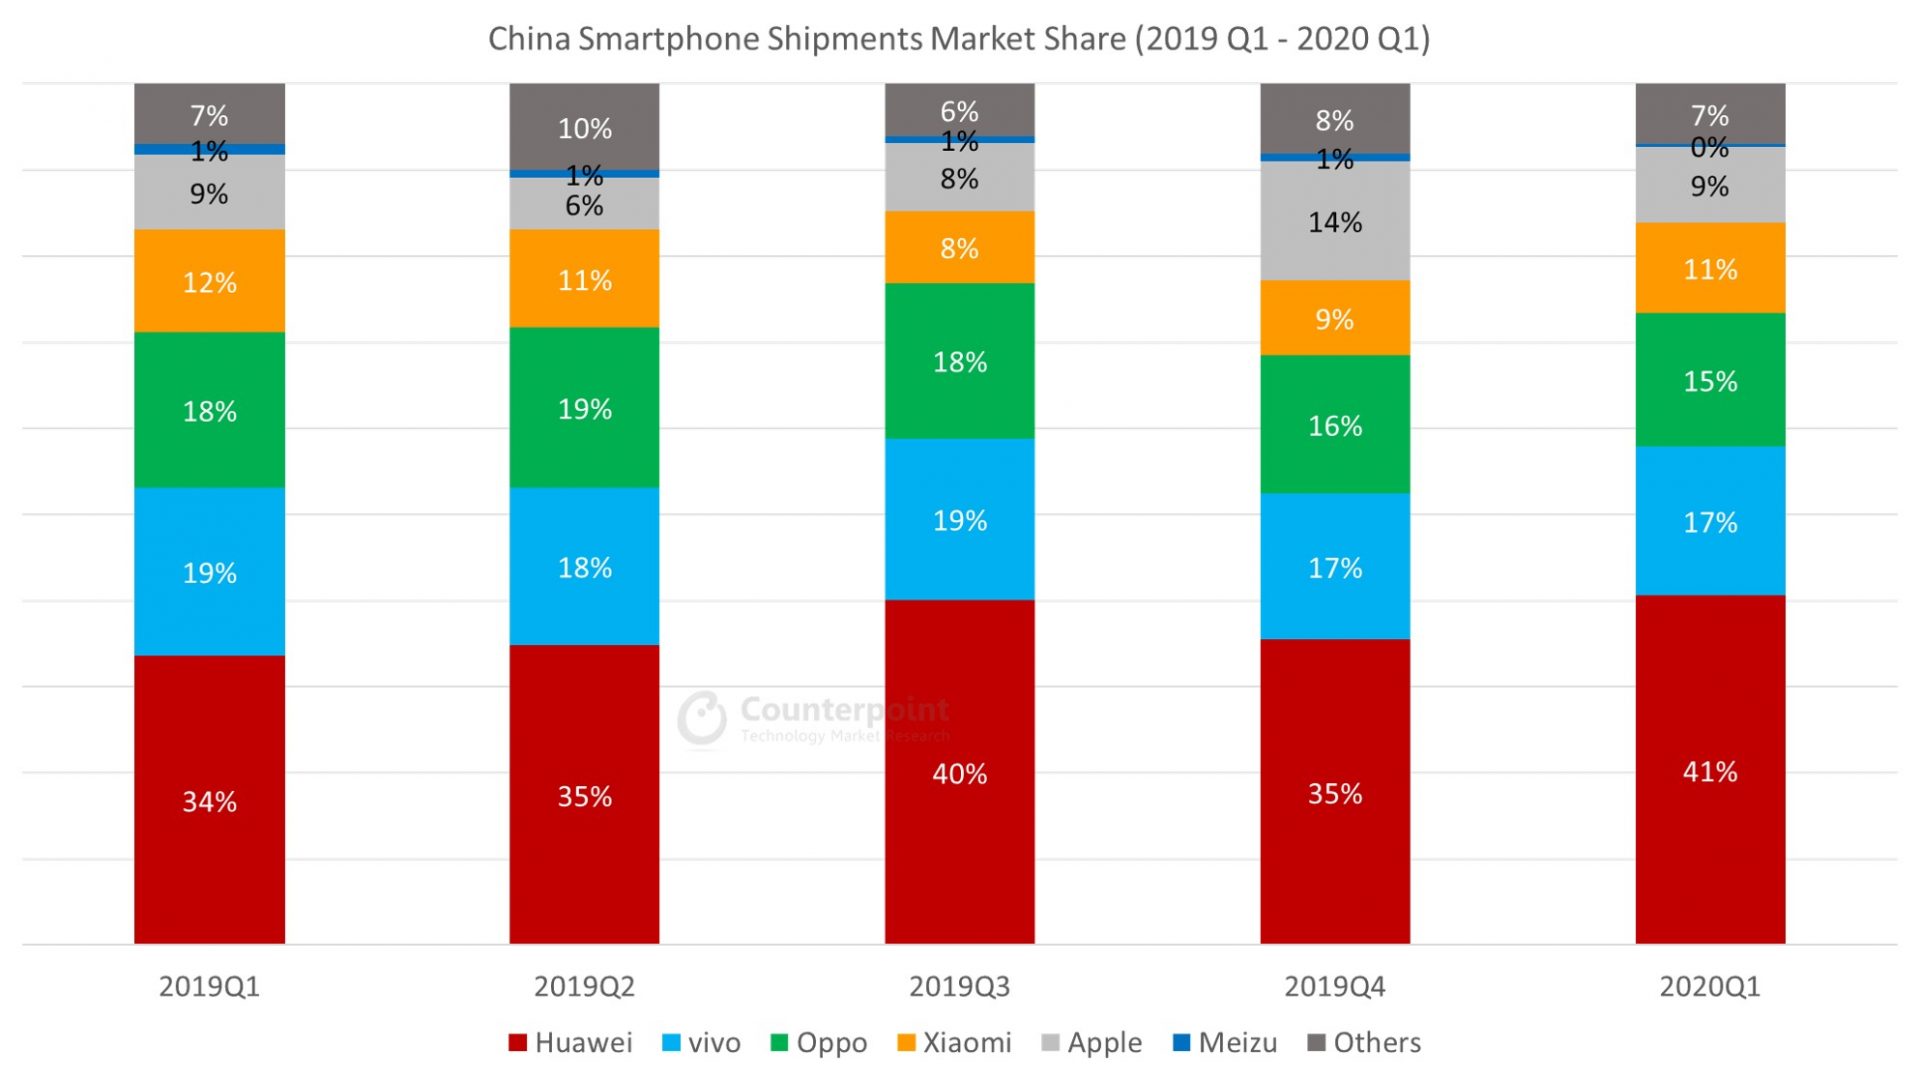 Counterpoint China Smartphone Shipments Market Share Q1 2020